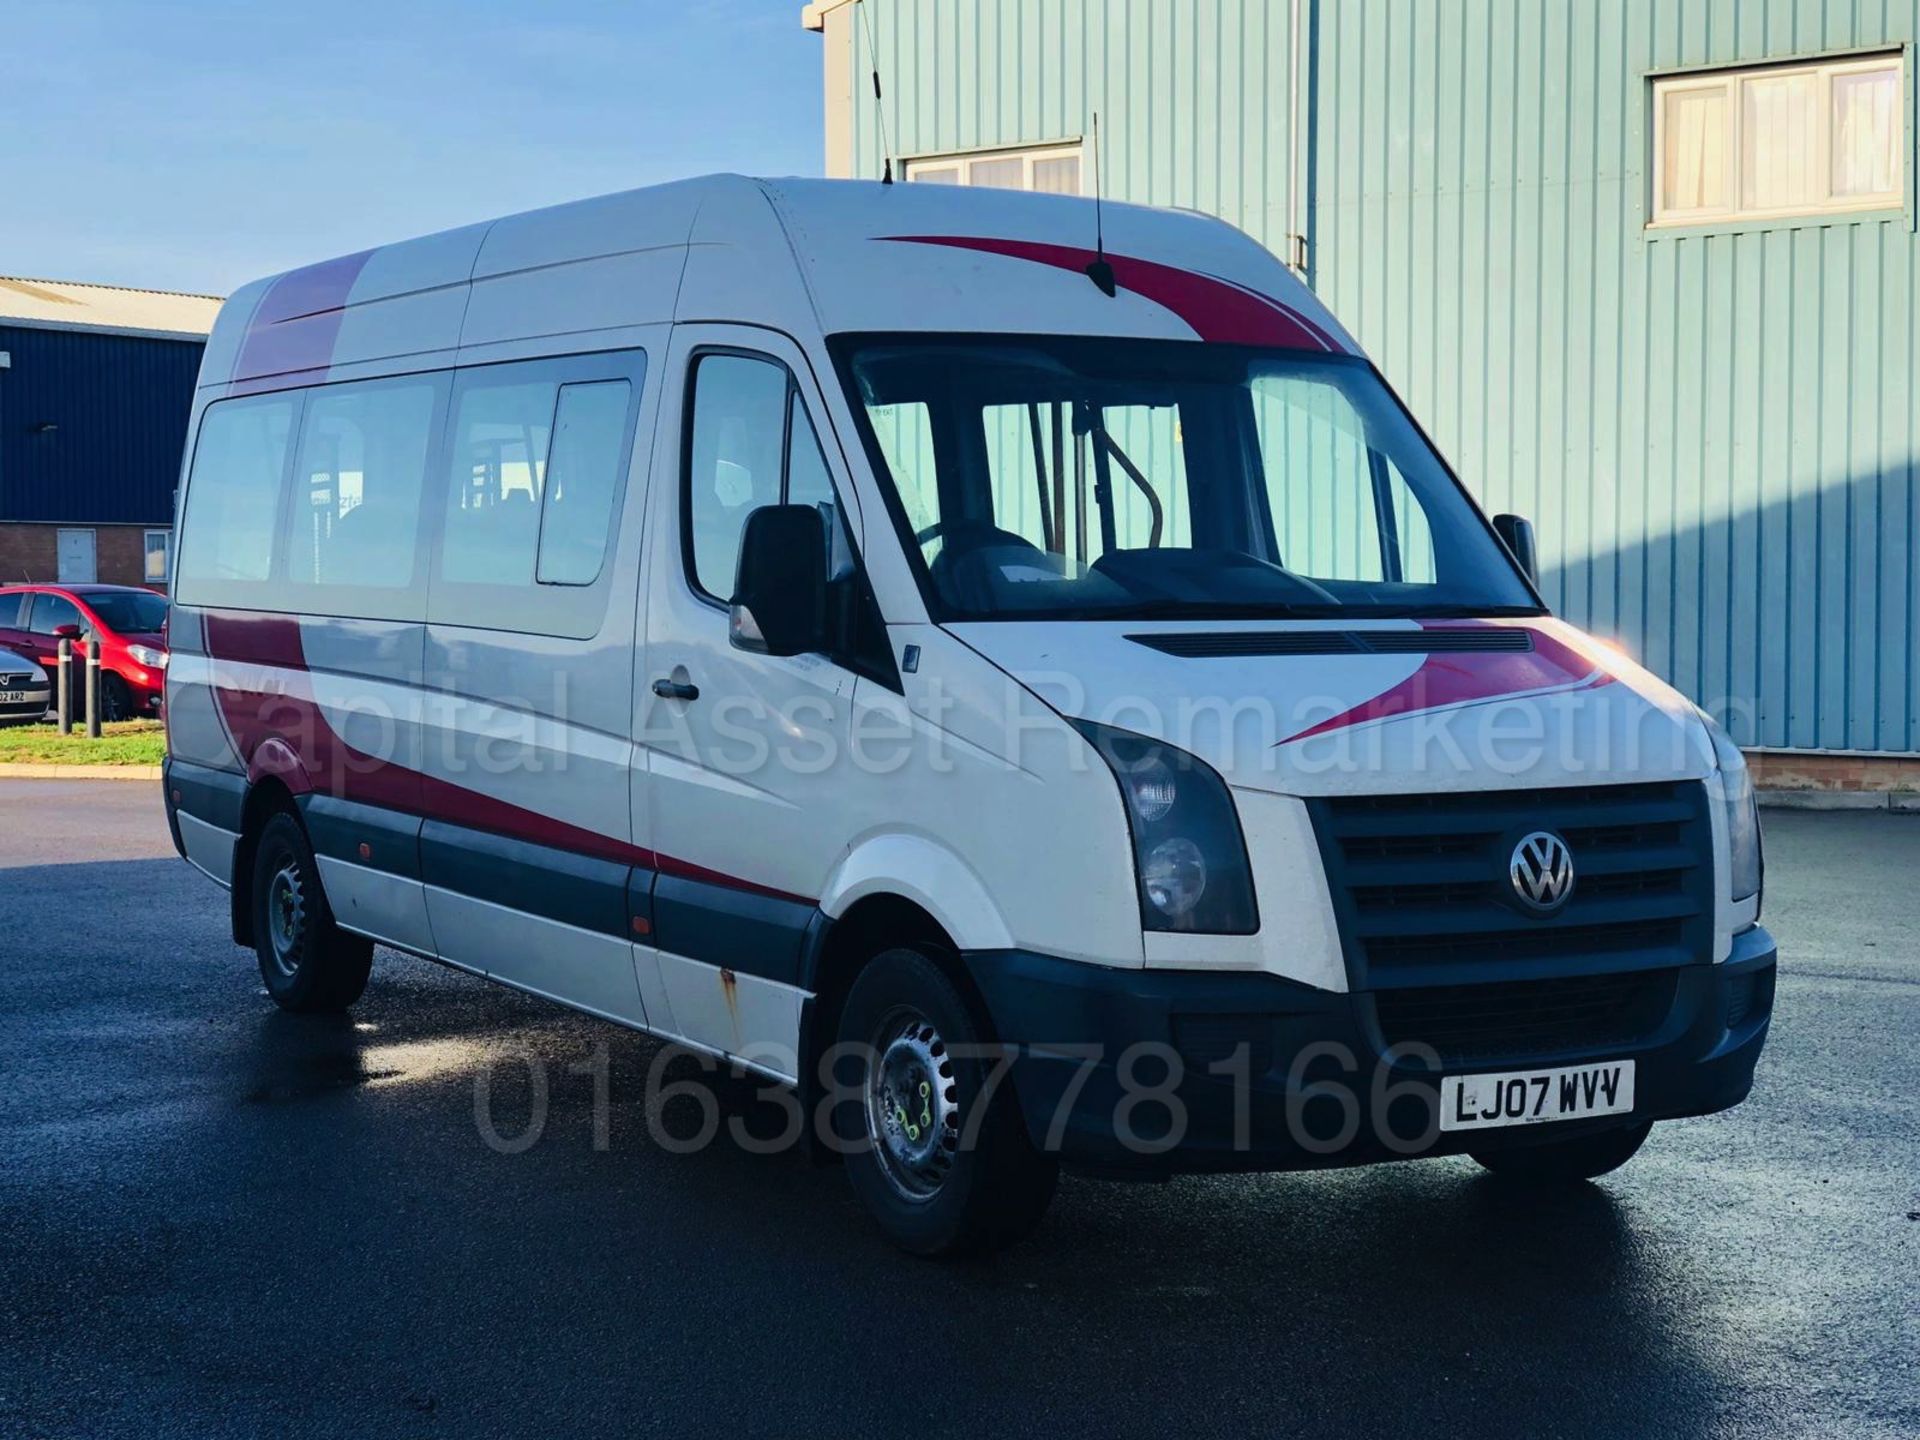 (On Sale) VOLKSWAGEN CRAFTER 2.5 TDI *LWB - 16 SEATER MINI-BUS* (2007) *ELECTRIC WHEEL CHAIR LIFT* - Image 10 of 35